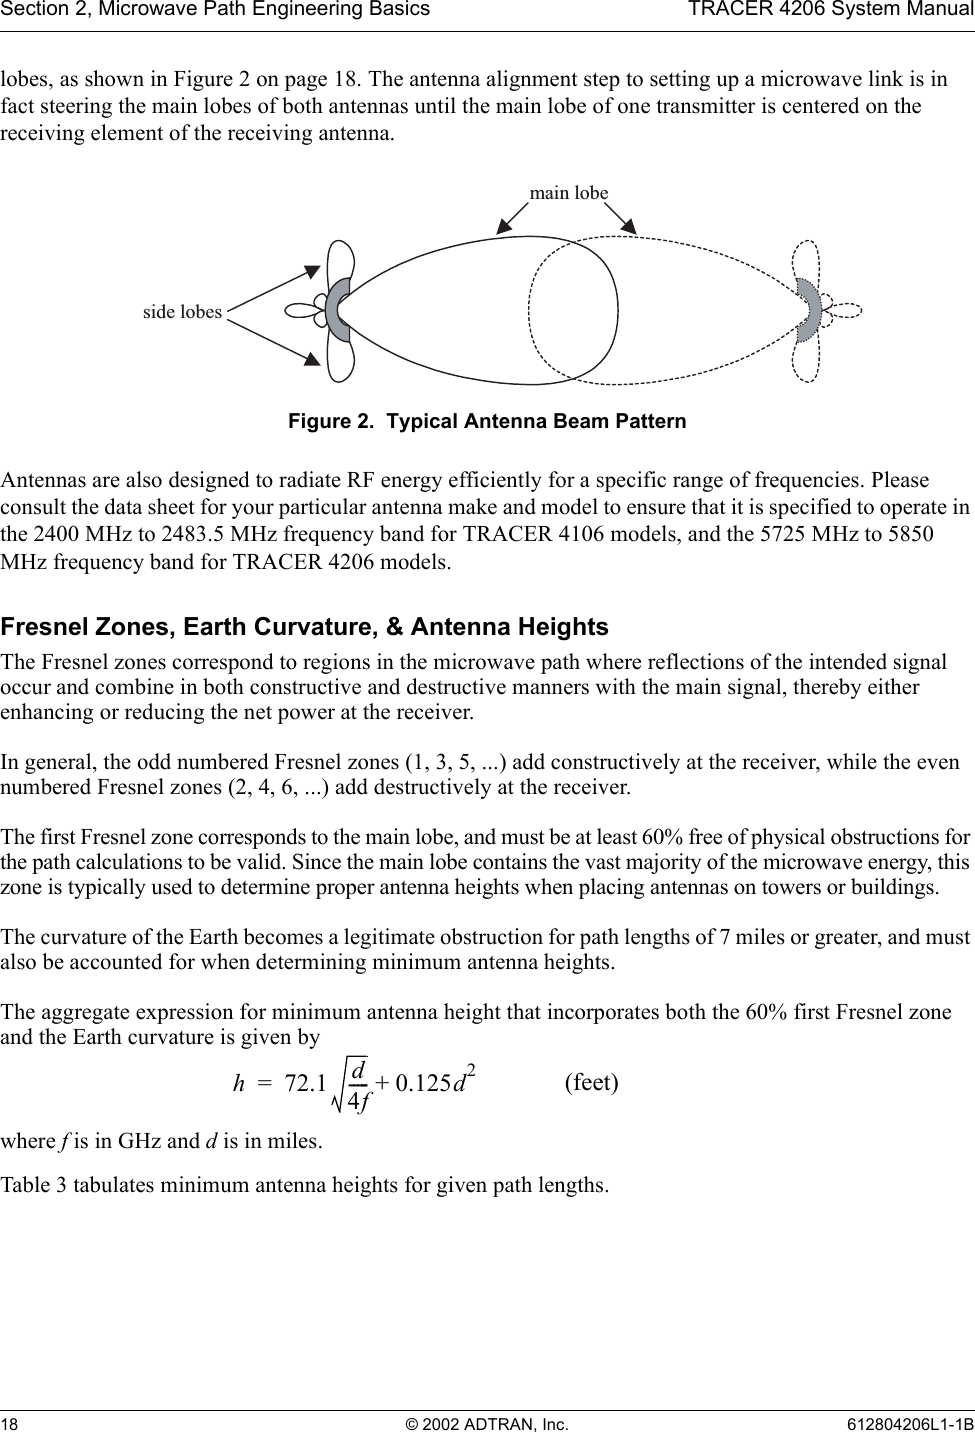 Section 2, Microwave Path Engineering Basics TRACER 4206 System Manual18 © 2002 ADTRAN, Inc. 612804206L1-1Blobes, as shown in Figure 2 on page 18. The antenna alignment step to setting up a microwave link is in fact steering the main lobes of both antennas until the main lobe of one transmitter is centered on the receiving element of the receiving antenna.Figure 2.  Typical Antenna Beam PatternAntennas are also designed to radiate RF energy efficiently for a specific range of frequencies. Please consult the data sheet for your particular antenna make and model to ensure that it is specified to operate in the 2400 MHz to 2483.5 MHz frequency band for TRACER 4106 models, and the 5725 MHz to 5850 MHz frequency band for TRACER 4206 models.Fresnel Zones, Earth Curvature, &amp; Antenna HeightsThe Fresnel zones correspond to regions in the microwave path where reflections of the intended signal occur and combine in both constructive and destructive manners with the main signal, thereby either enhancing or reducing the net power at the receiver.In general, the odd numbered Fresnel zones (1, 3, 5, ...) add constructively at the receiver, while the even numbered Fresnel zones (2, 4, 6, ...) add destructively at the receiver.The first Fresnel zone corresponds to the main lobe, and must be at least 60% free of physical obstructions for the path calculations to be valid. Since the main lobe contains the vast majority of the microwave energy, this zone is typically used to determine proper antenna heights when placing antennas on towers or buildings.The curvature of the Earth becomes a legitimate obstruction for path lengths of 7 miles or greater, and must also be accounted for when determining minimum antenna heights.The aggregate expression for minimum antenna height that incorporates both the 60% first Fresnel zone and the Earth curvature is given bywhere f is in GHz and d is in miles.Table 3 tabulates minimum antenna heights for given path lengths.main lobeside lobesh72.1 d4f----- 0.125d2  (feet)